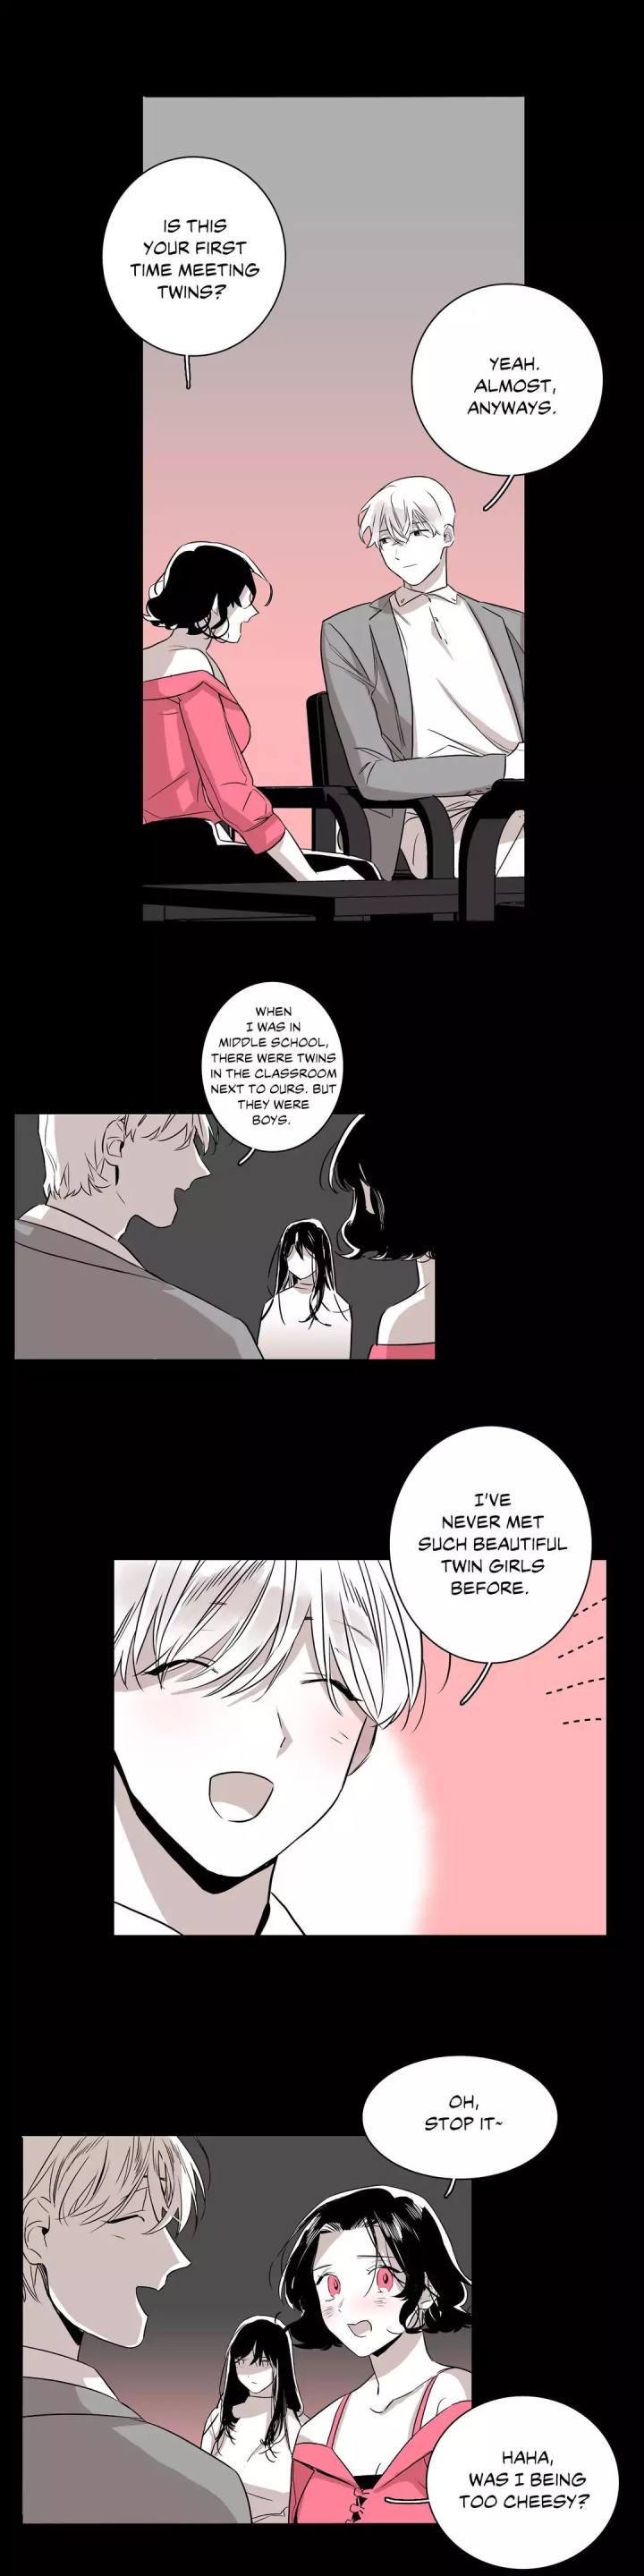 Vanishing Twin - Chapter 7 Page 4